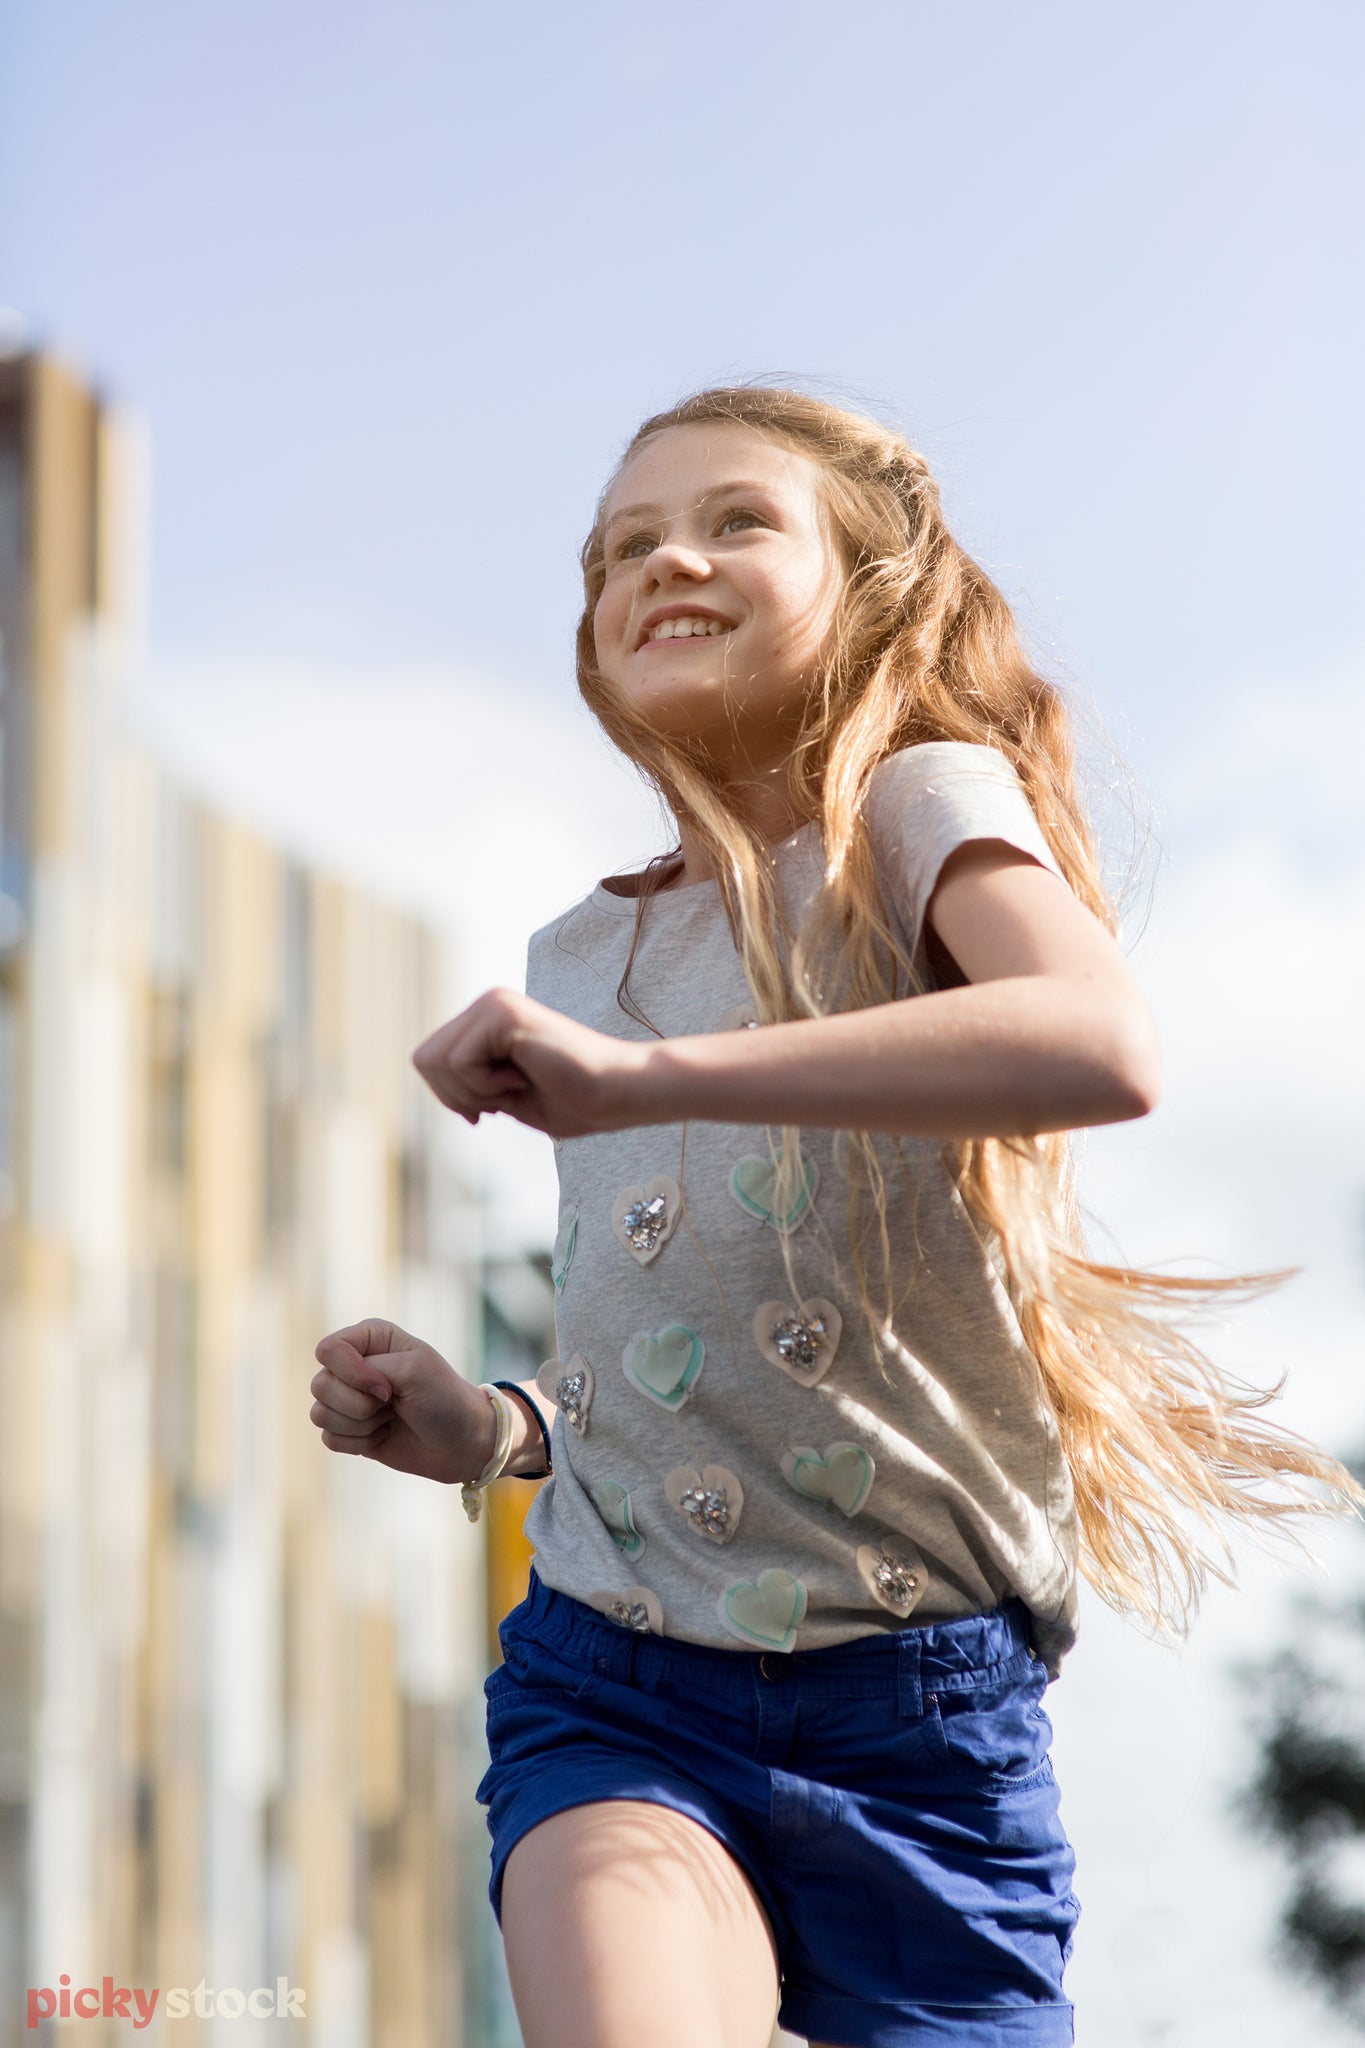 Portrait of a young girl running, the background is blurred as the sunlight cast small beams on her face.